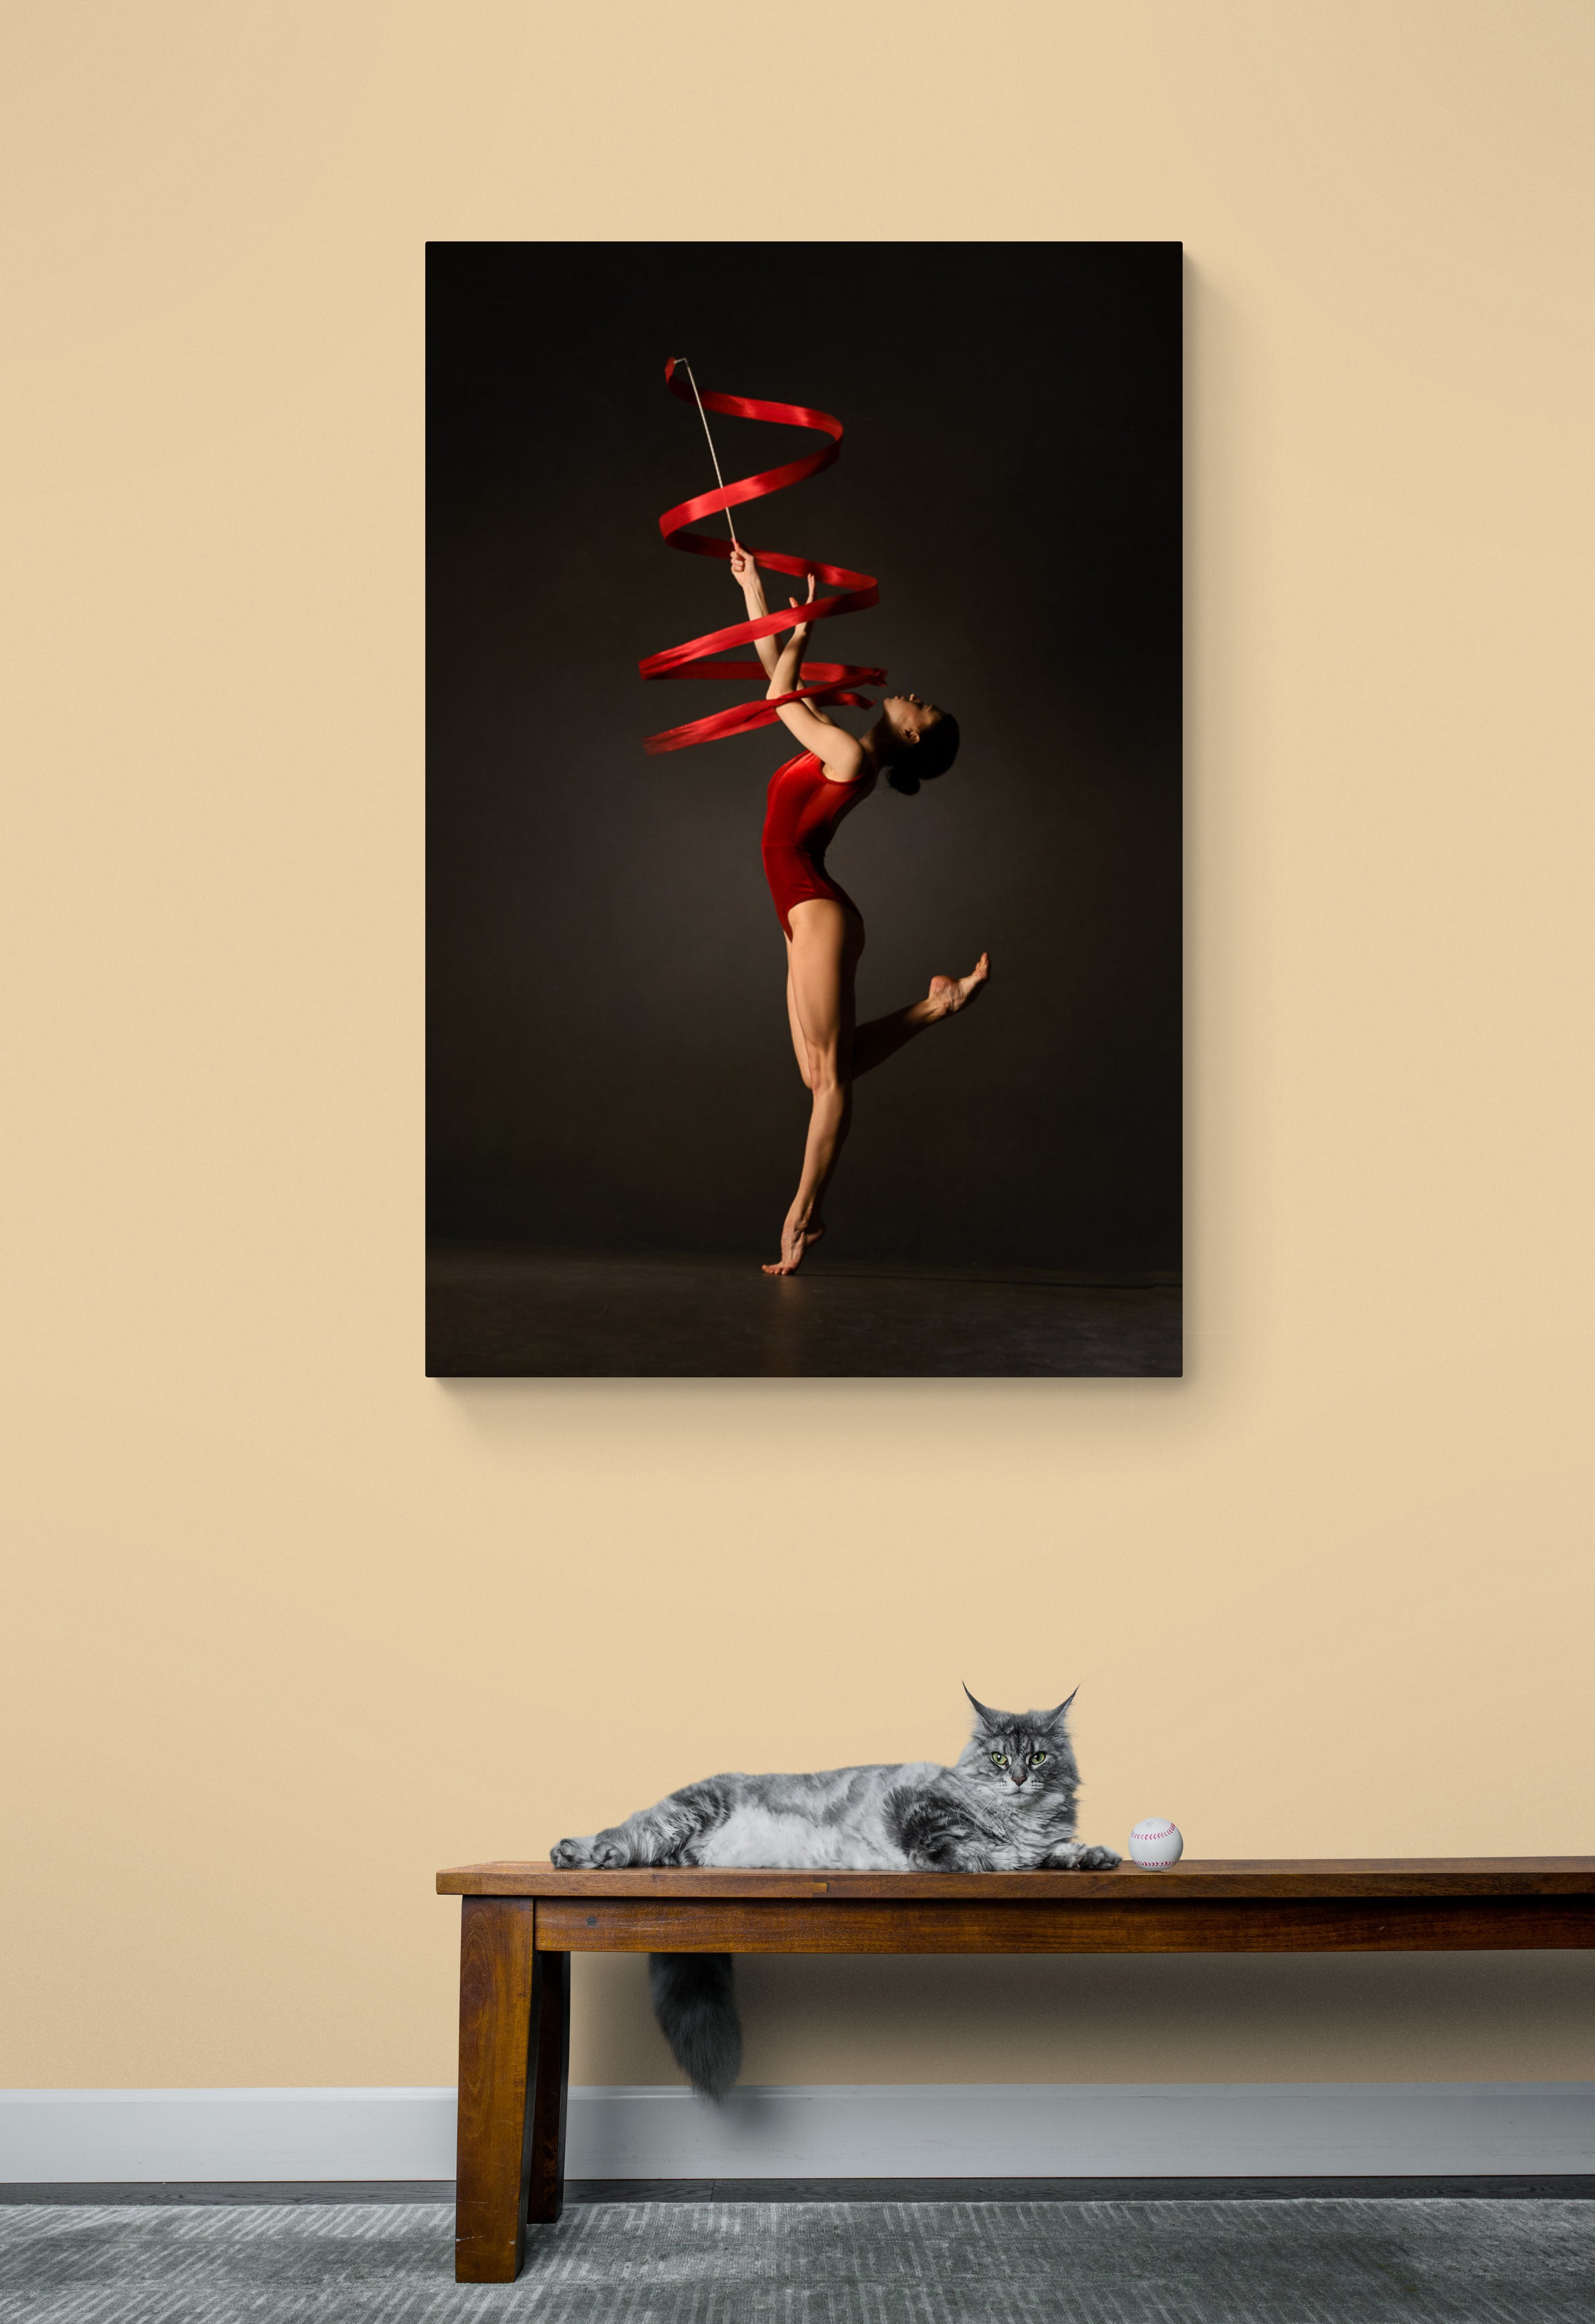 Female gymnast, red bodysuit, practicing, ribbon, red. Art print on the wall. below a cat sitting on a bench.